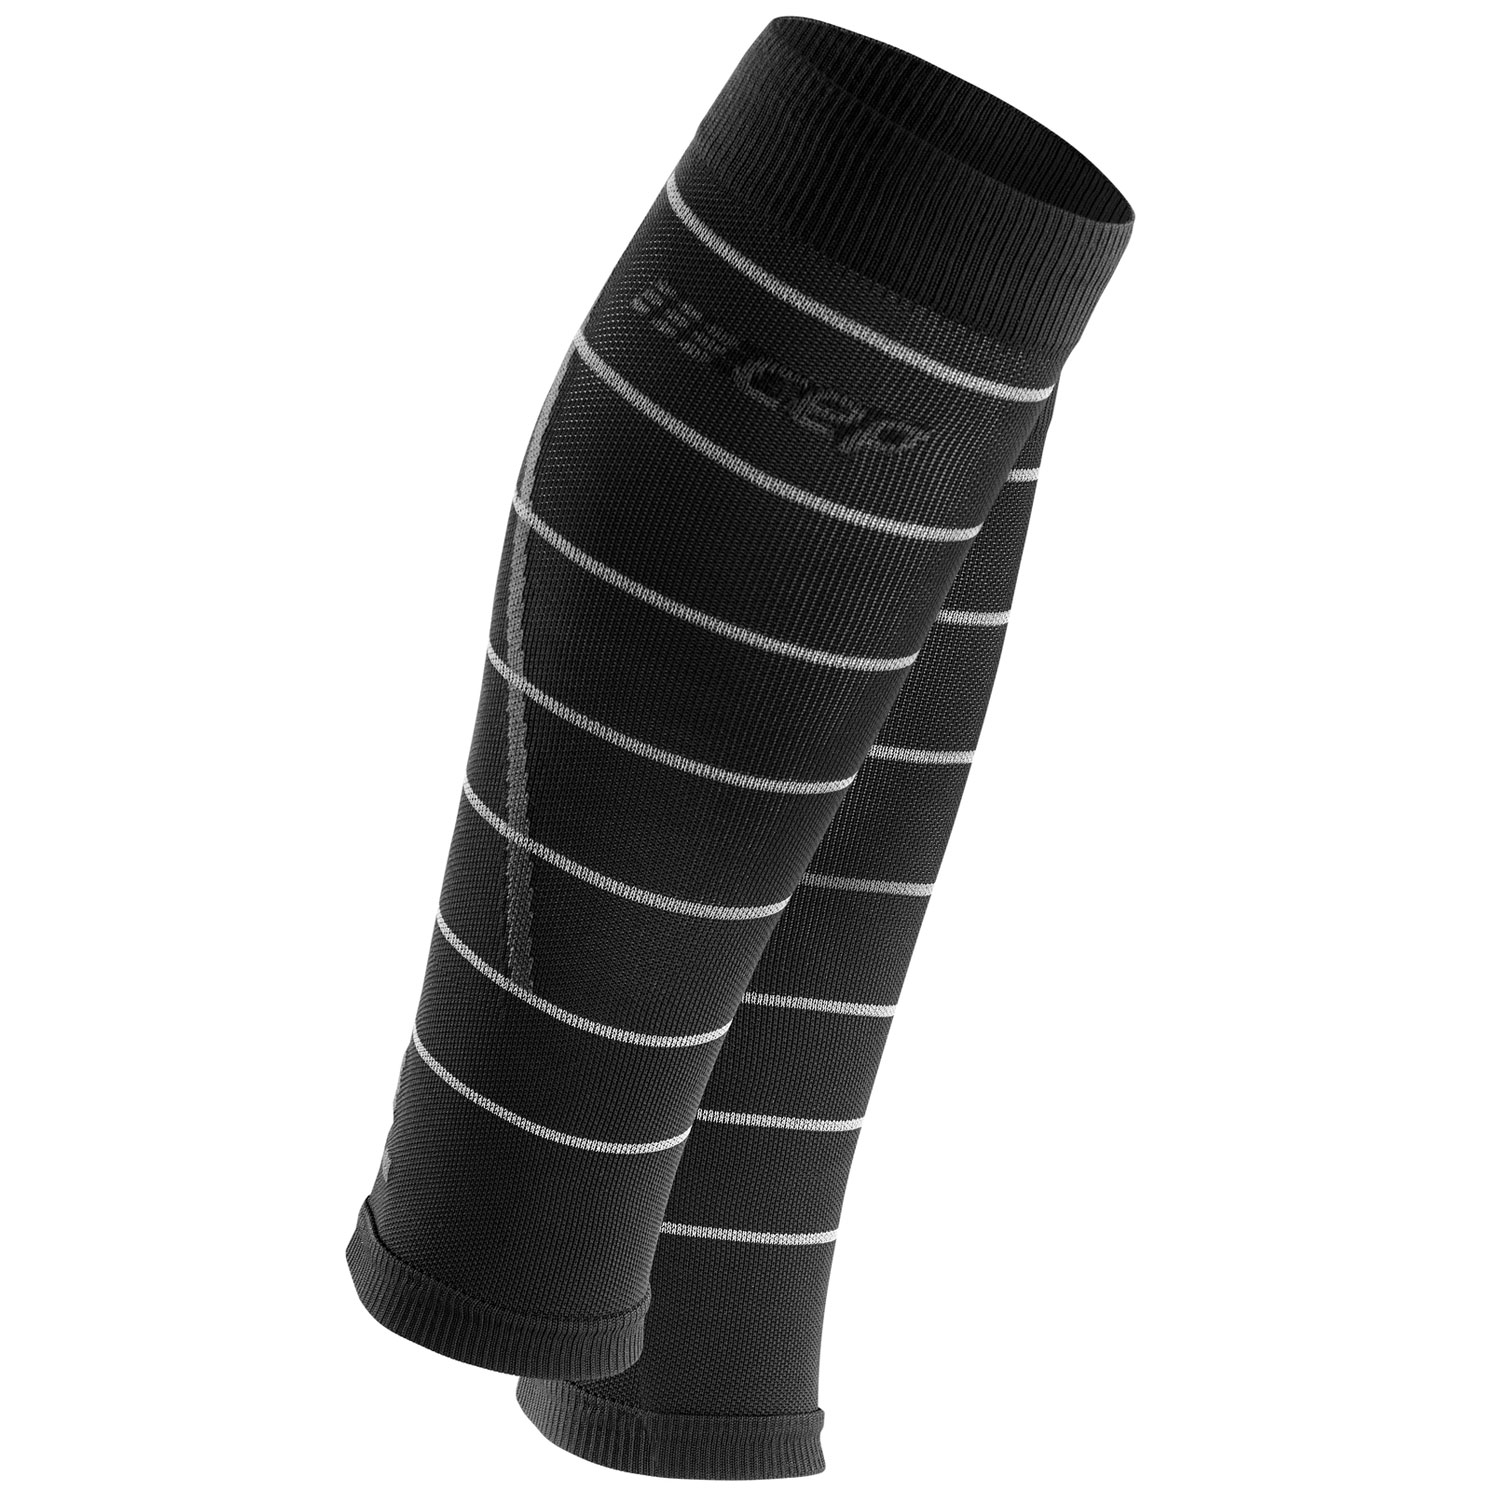 Image of CEP Reflective Compression Calf Sleeves - black